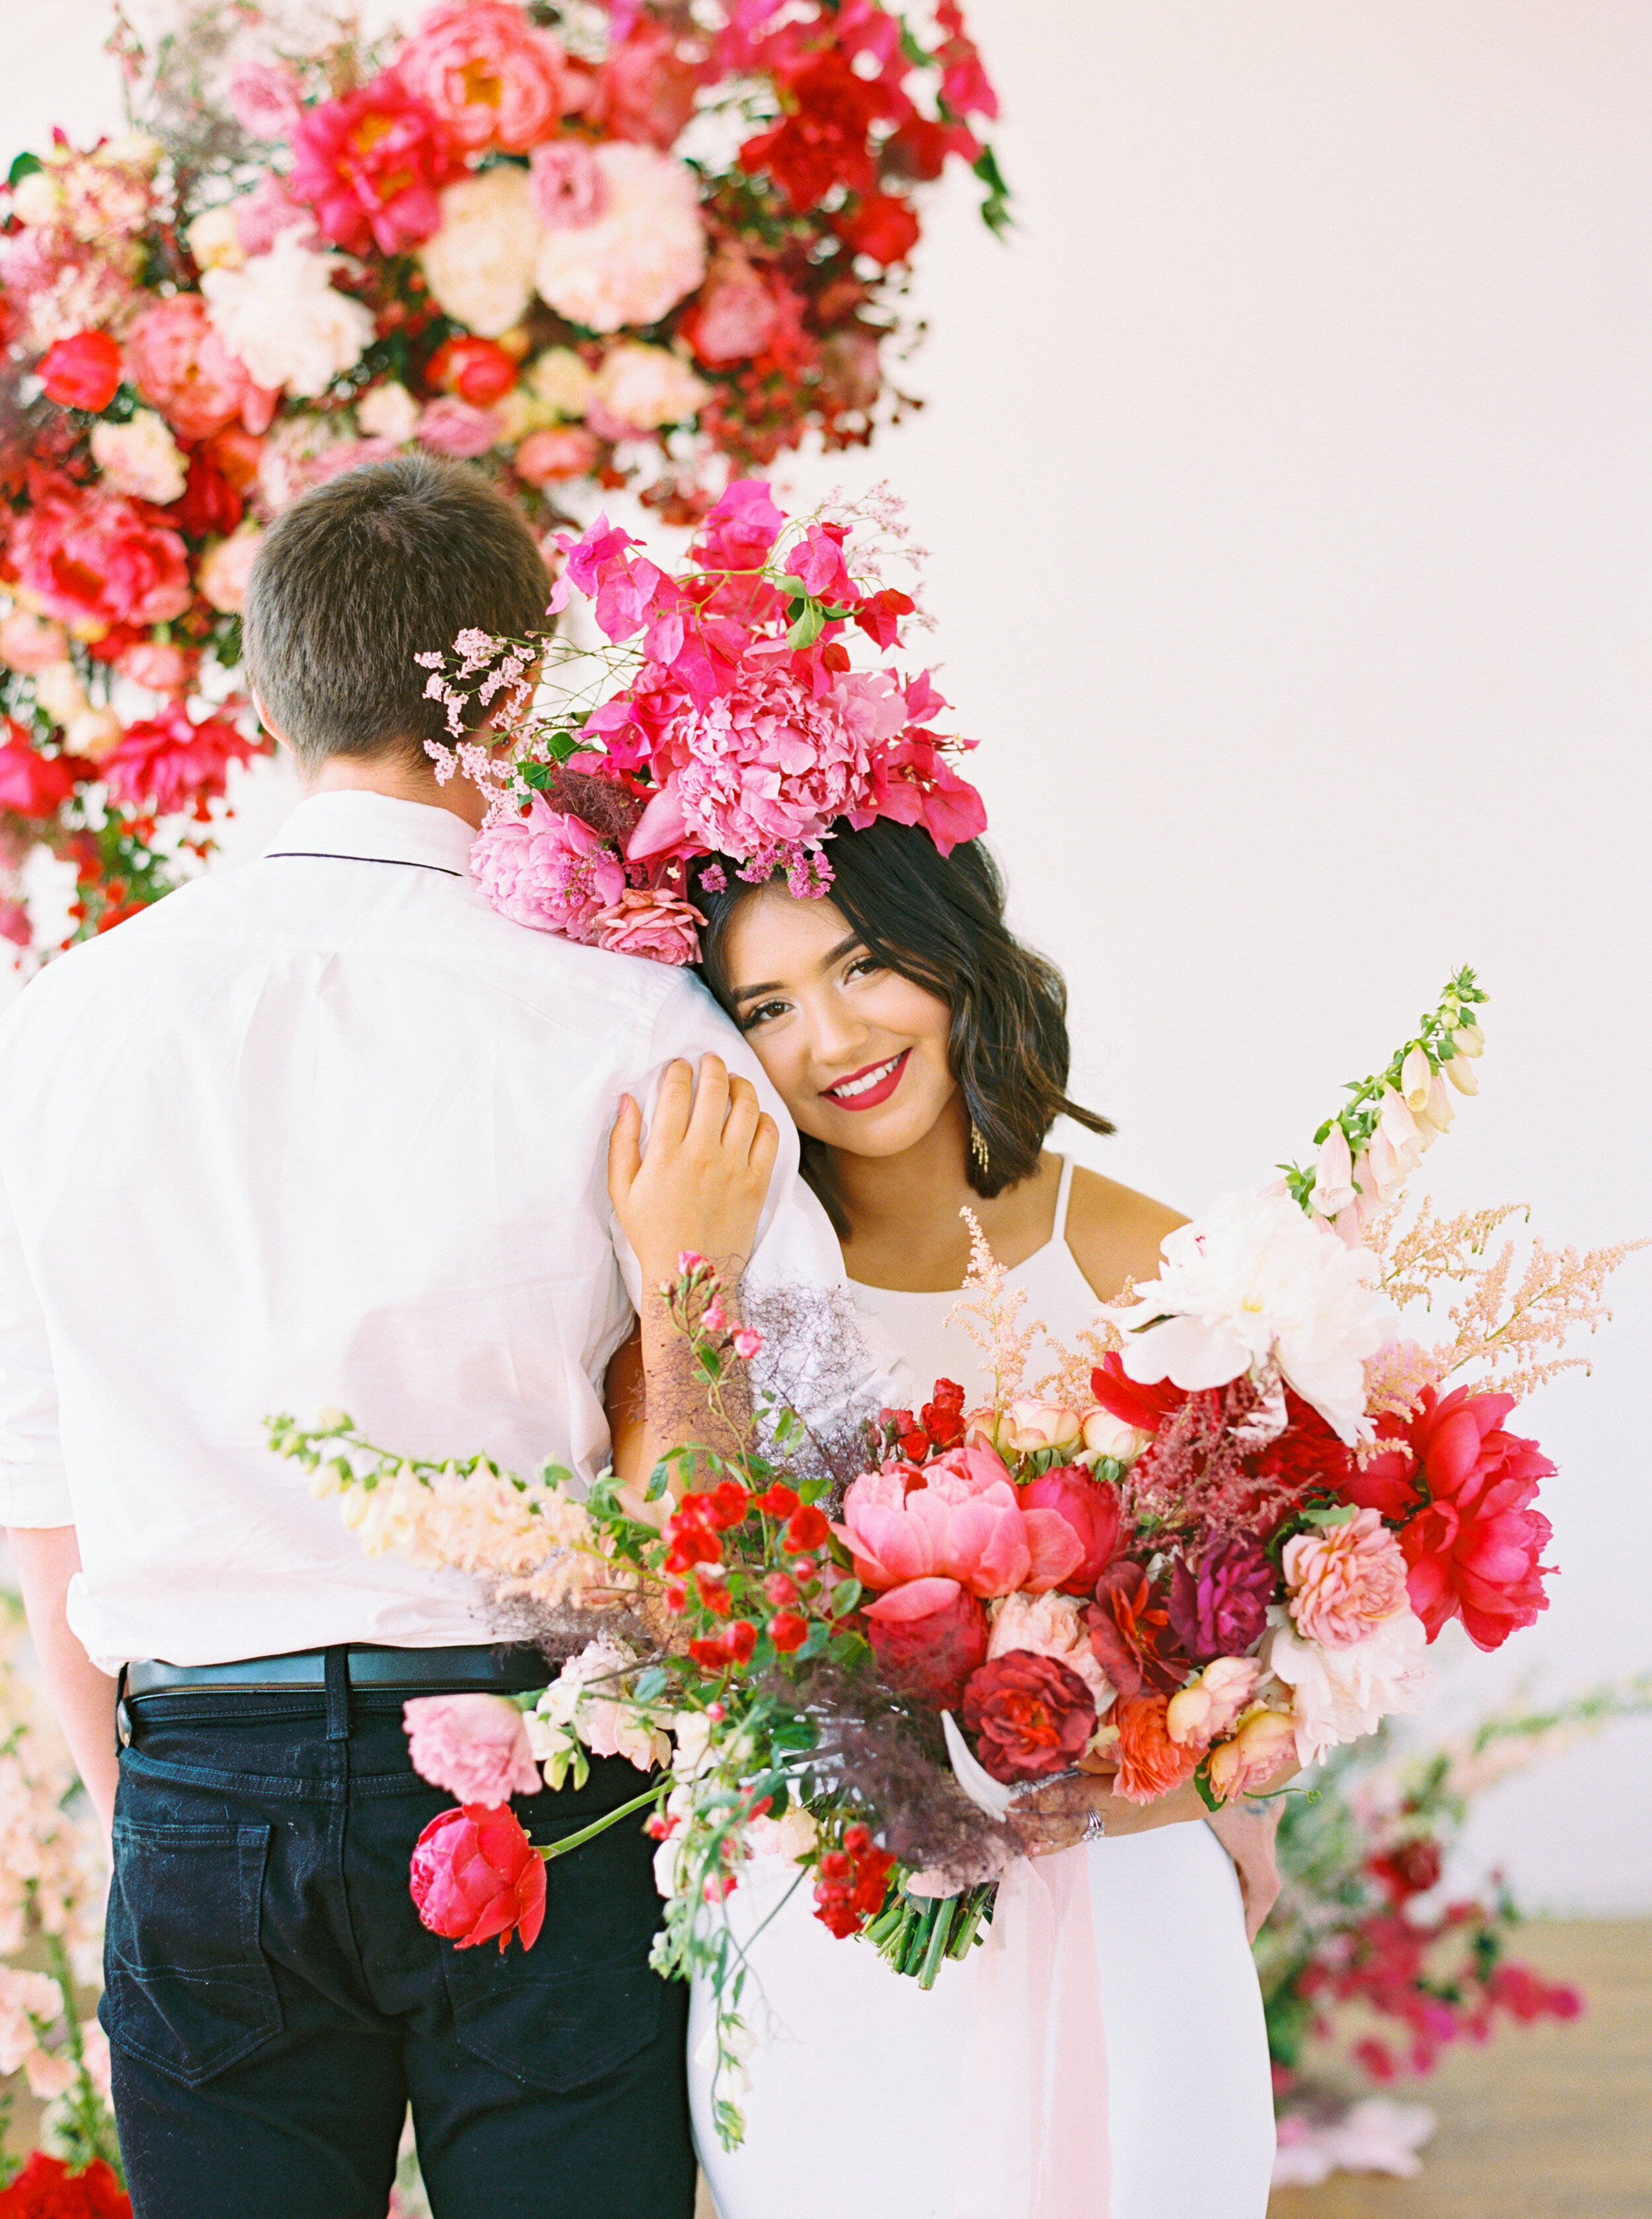 A Romantic Wedding Elopement Filled with Colorful Fuchsia - Sarahi Hadden Submission-52.jpg